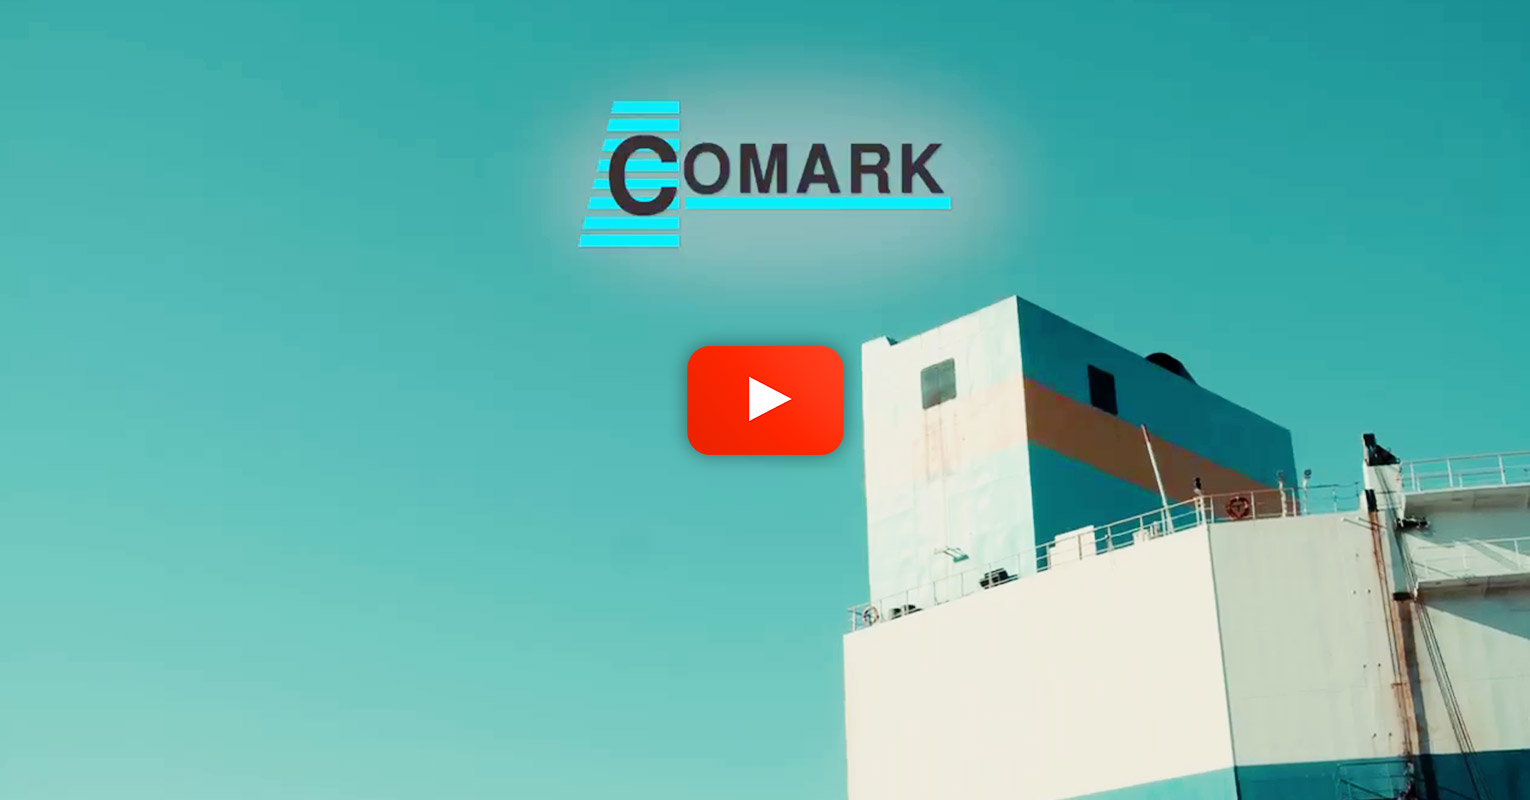 Video - Comark Project Logistics Handled a 75t Drill Rig by RORO from Central Europe to Africa via Port of Koper